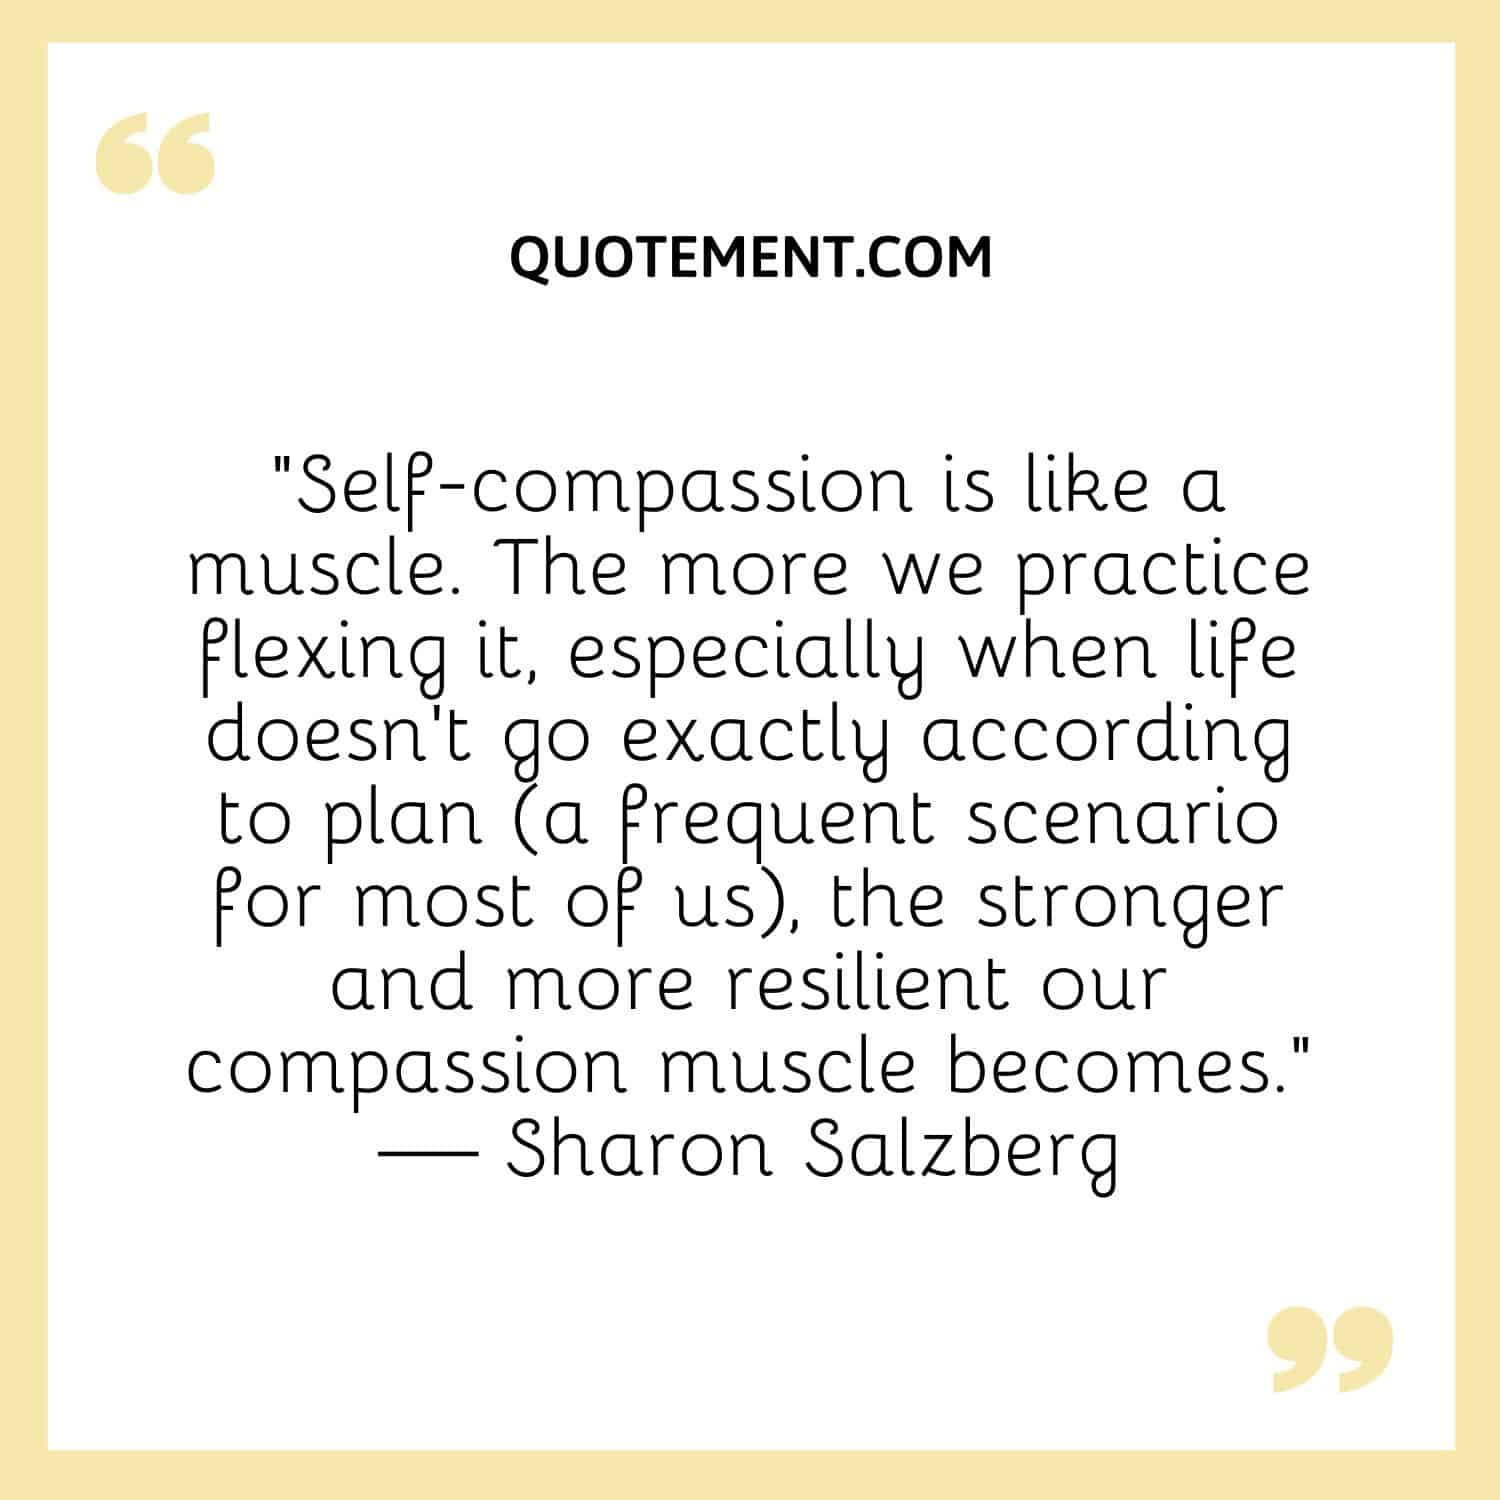 Self-compassion is like a muscle